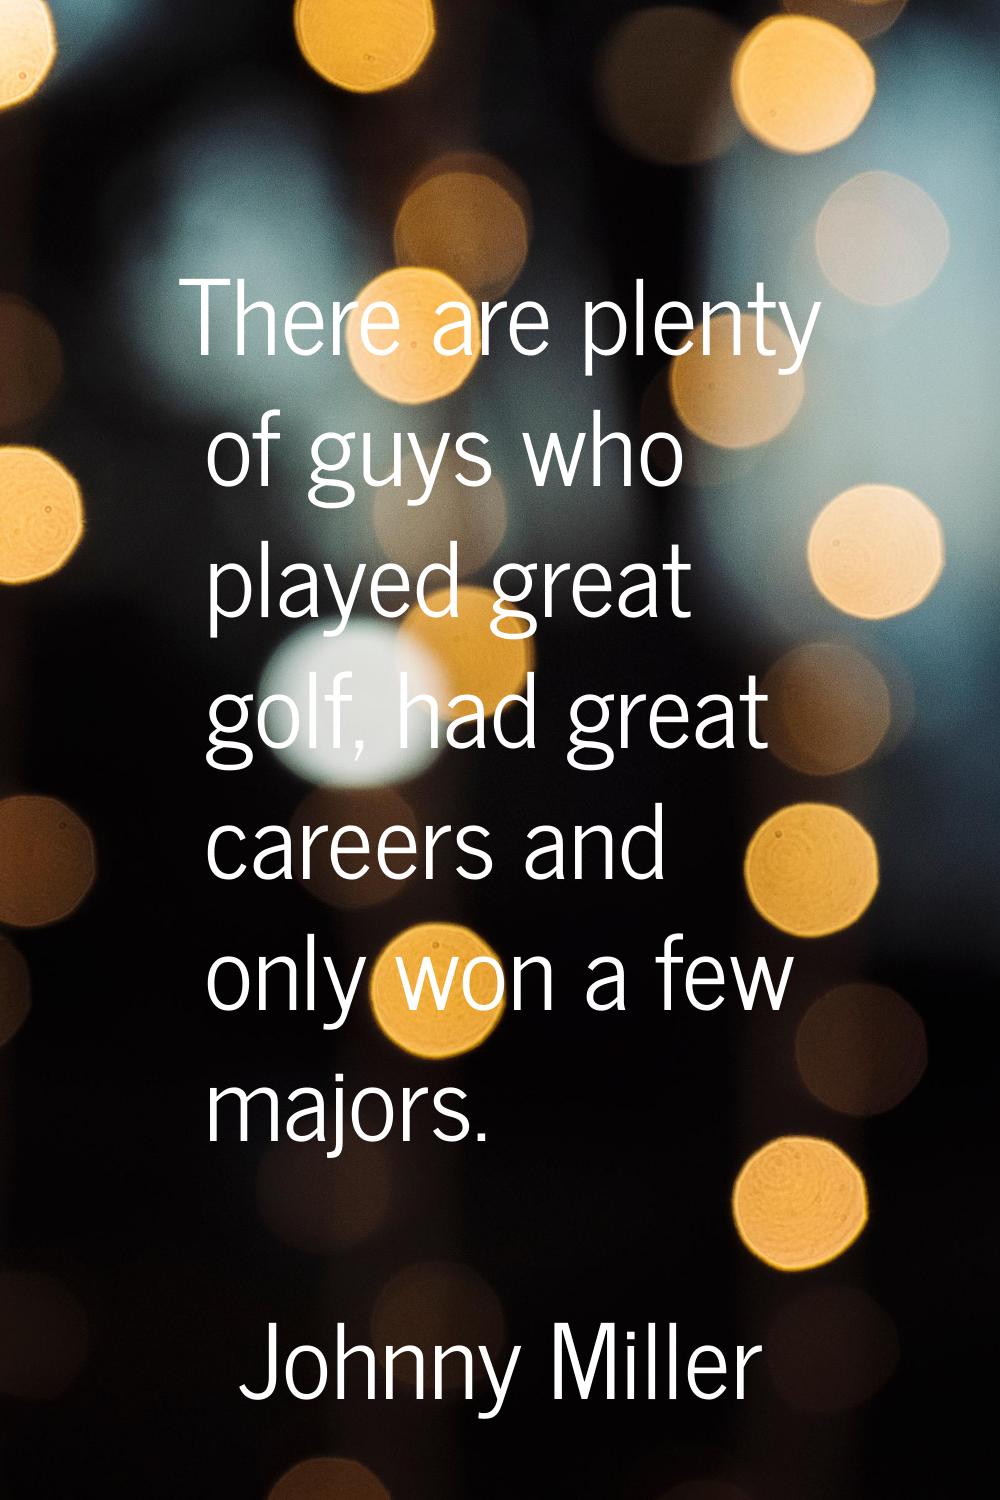 There are plenty of guys who played great golf, had great careers and only won a few majors.